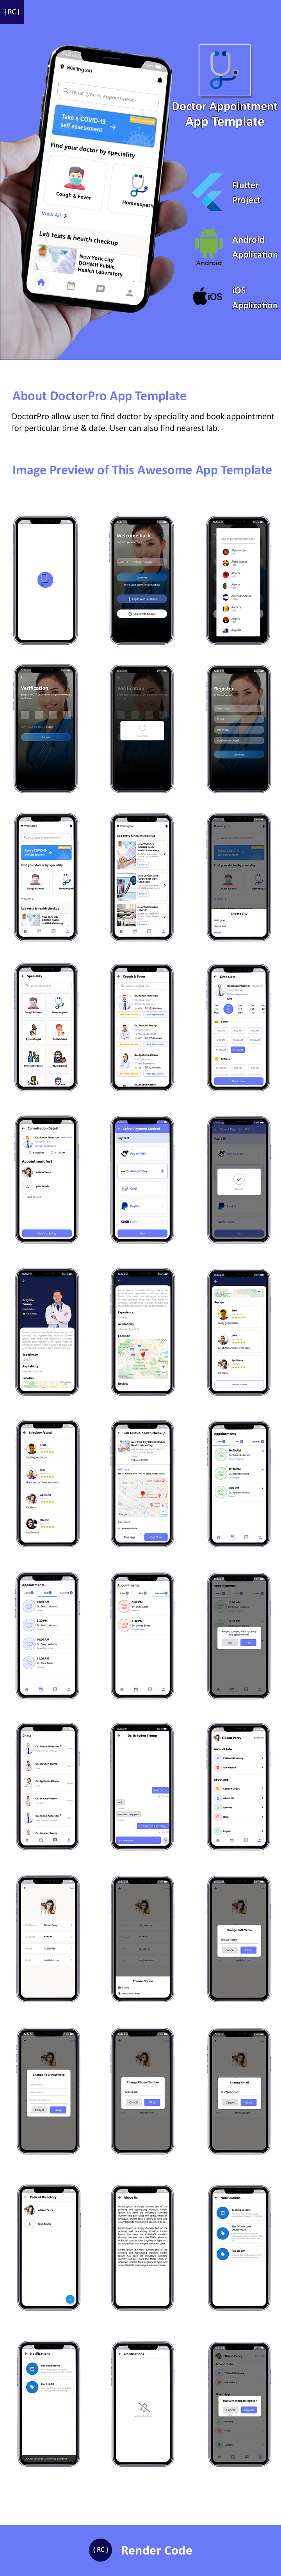 Doctor Appointment Booking App + Online Pharmacy App + Delivery Boy App Template in Flutter | 3 Apps - 7